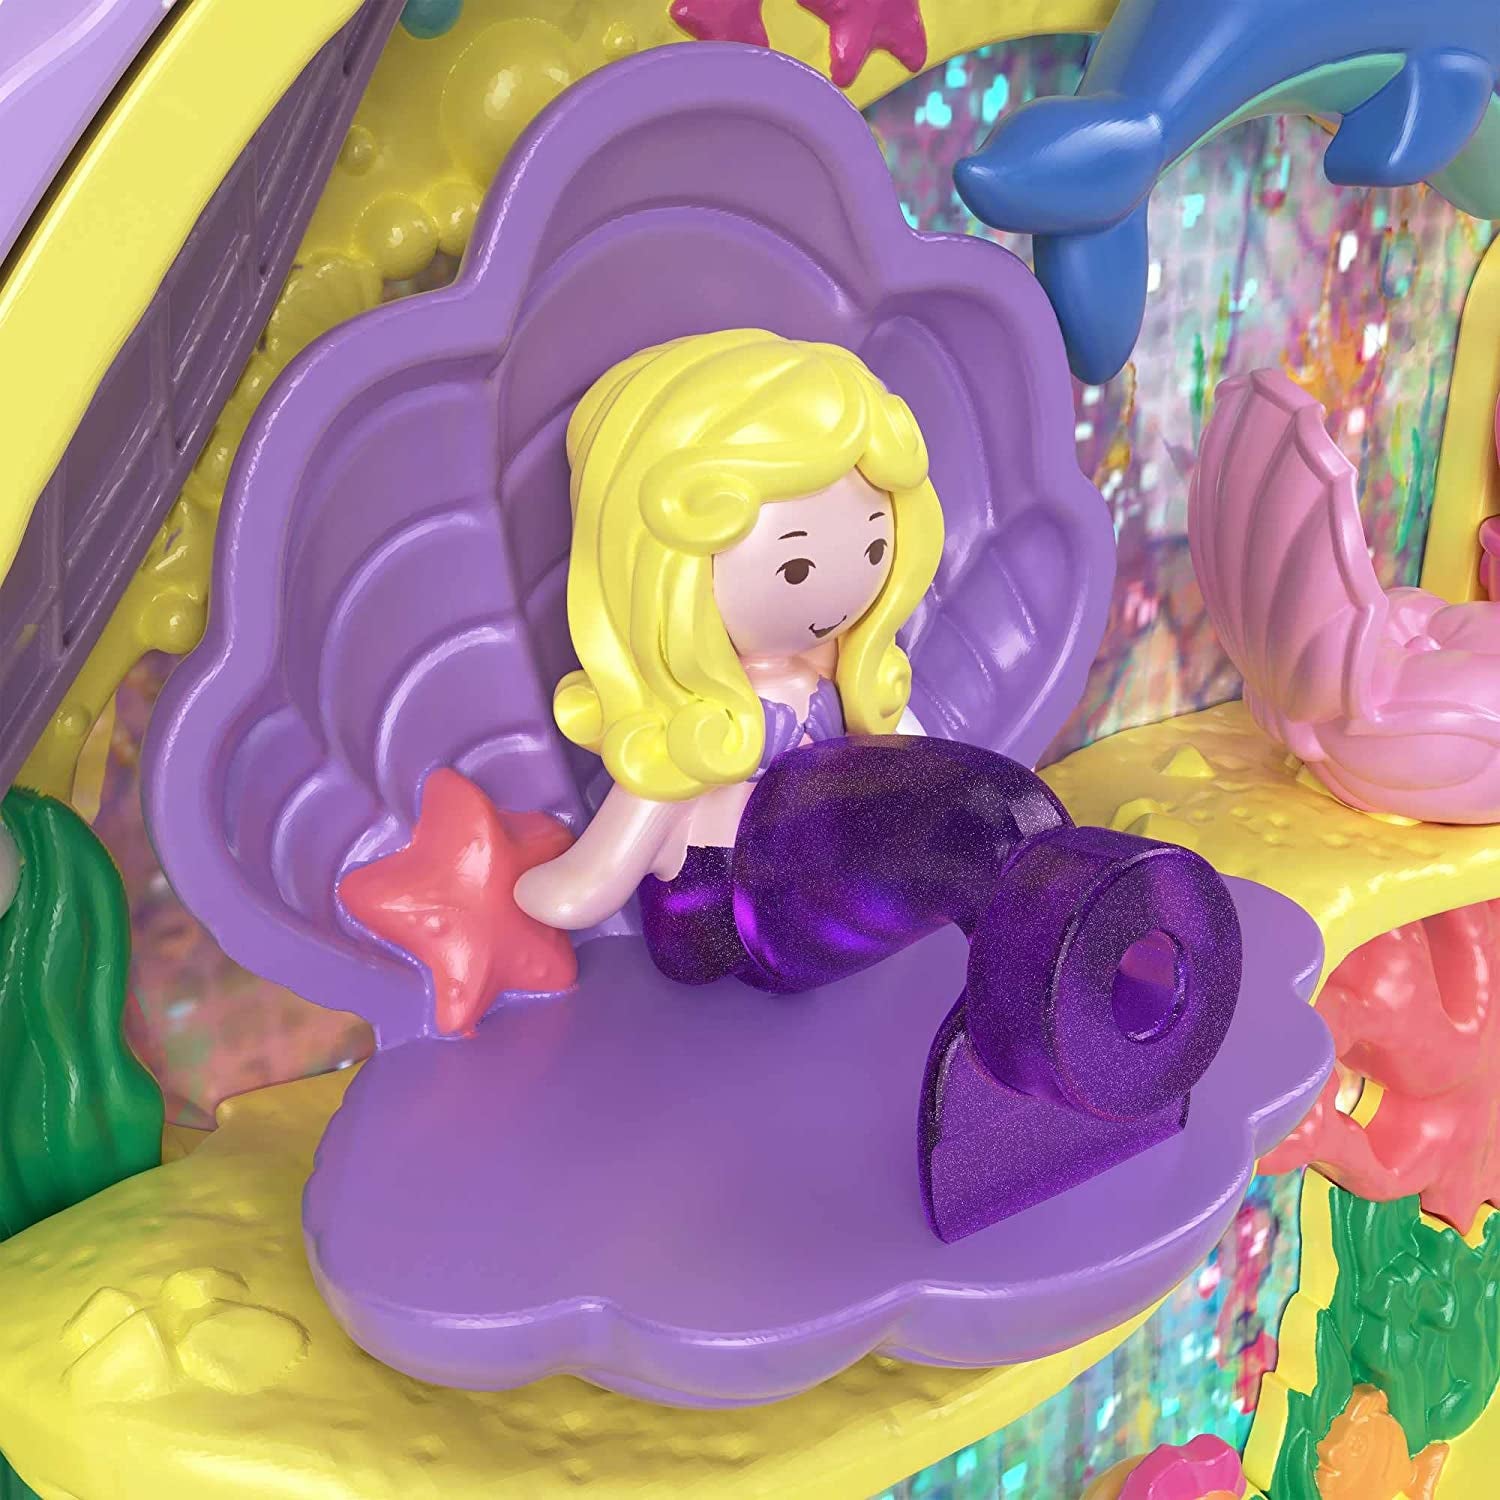 Polly Pocket Unicorn Forest with Glitter Horn, Compact Tea Party-Themed  Playset